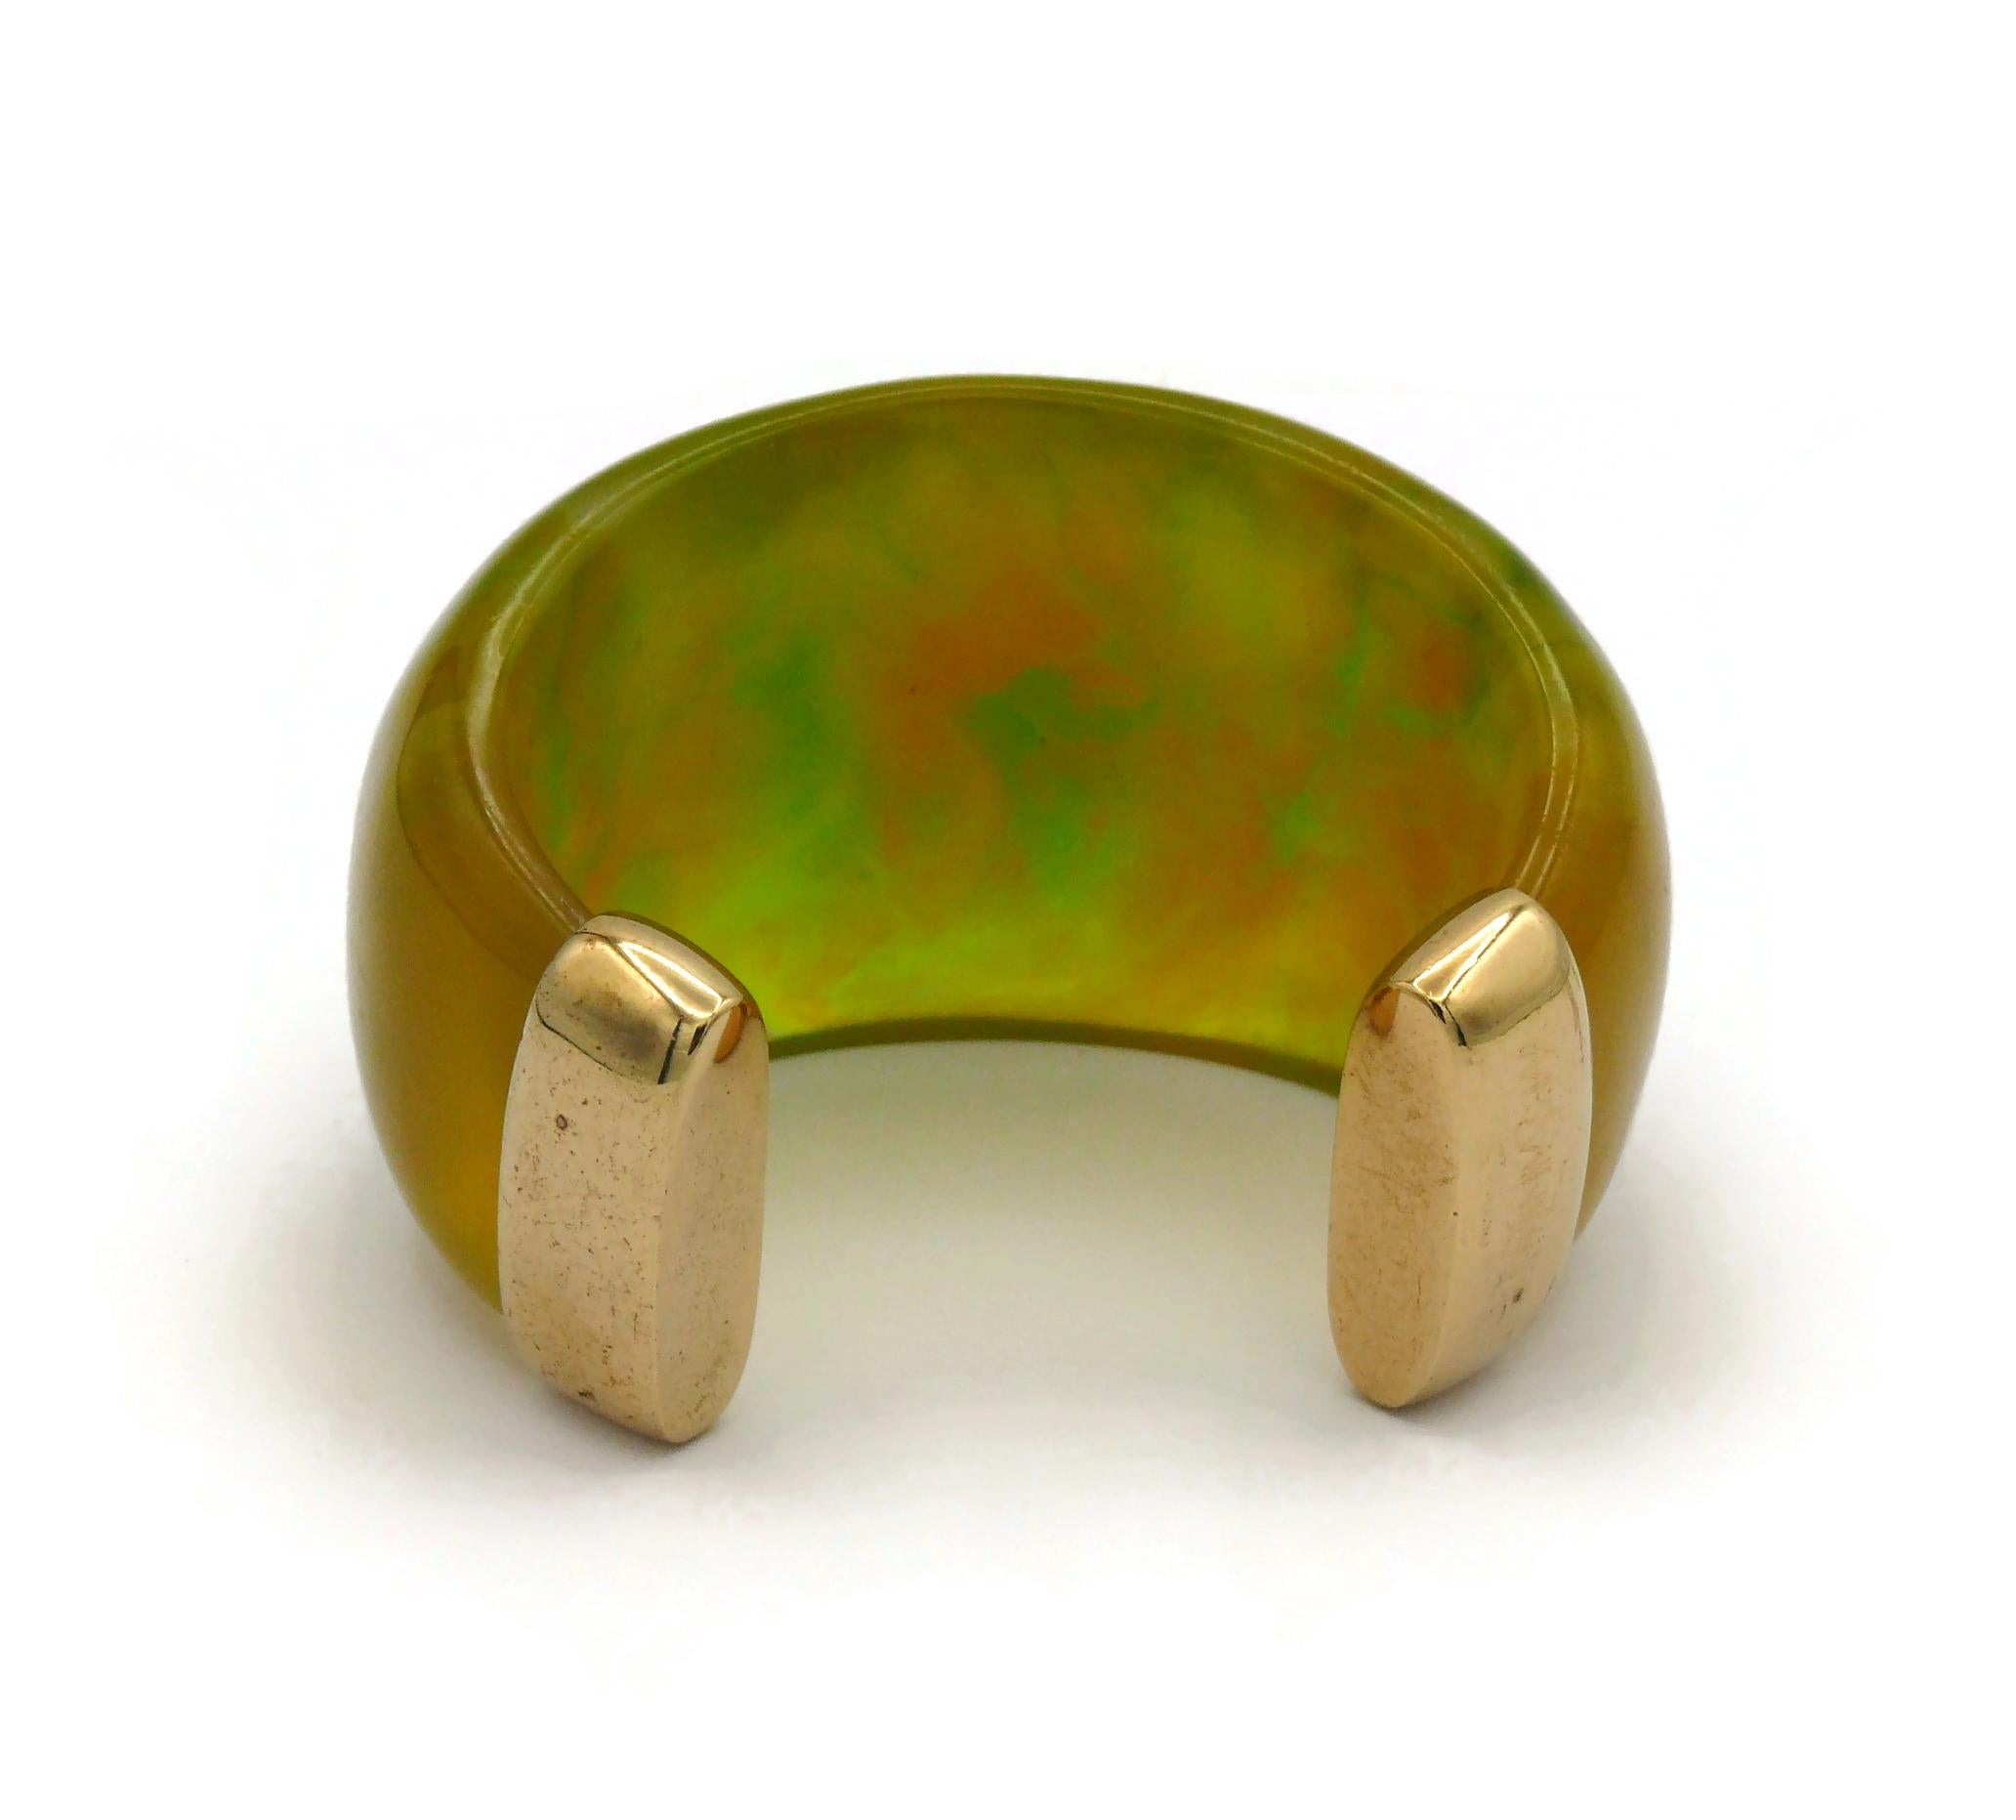 YVES SAINT LAURENT YSL Vintage Yellow Green Marbled Resin Cuff Bracelet For Sale 8